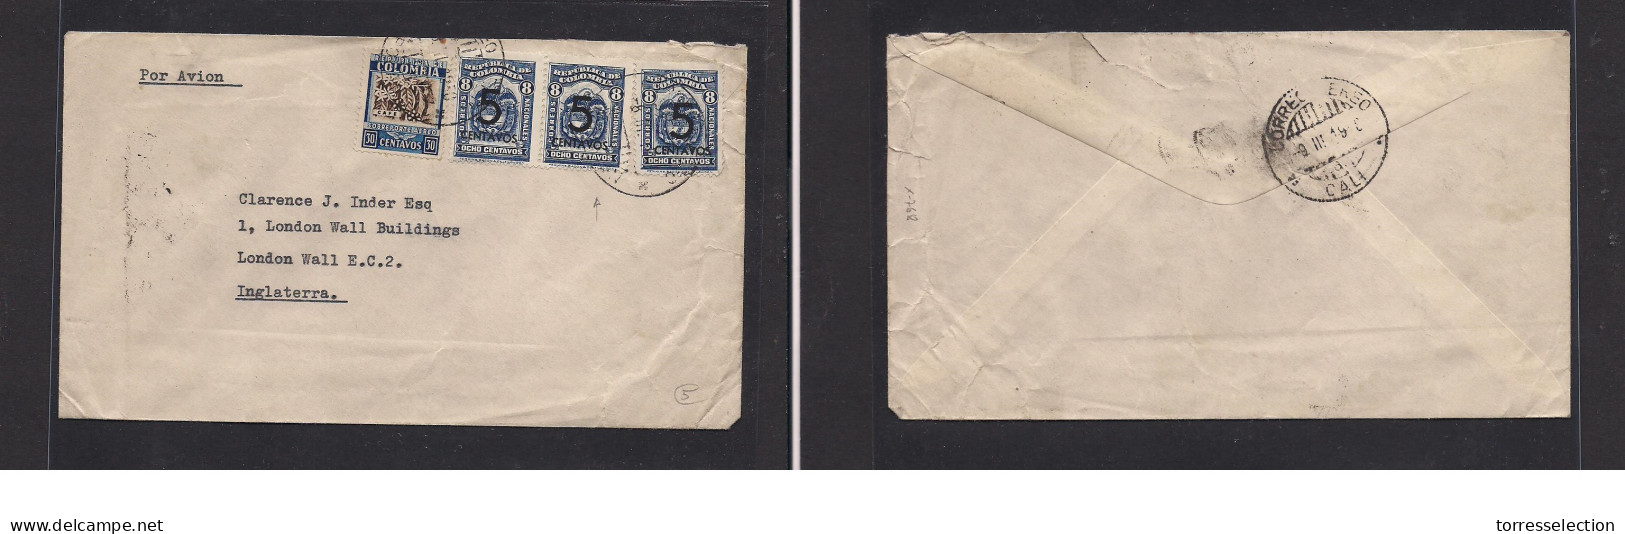 COLOMBIA. Colombia - Cover -  1938 Cali To UK Air Ovpt Mult Fkd Env. Easy Deal. - Kolumbien